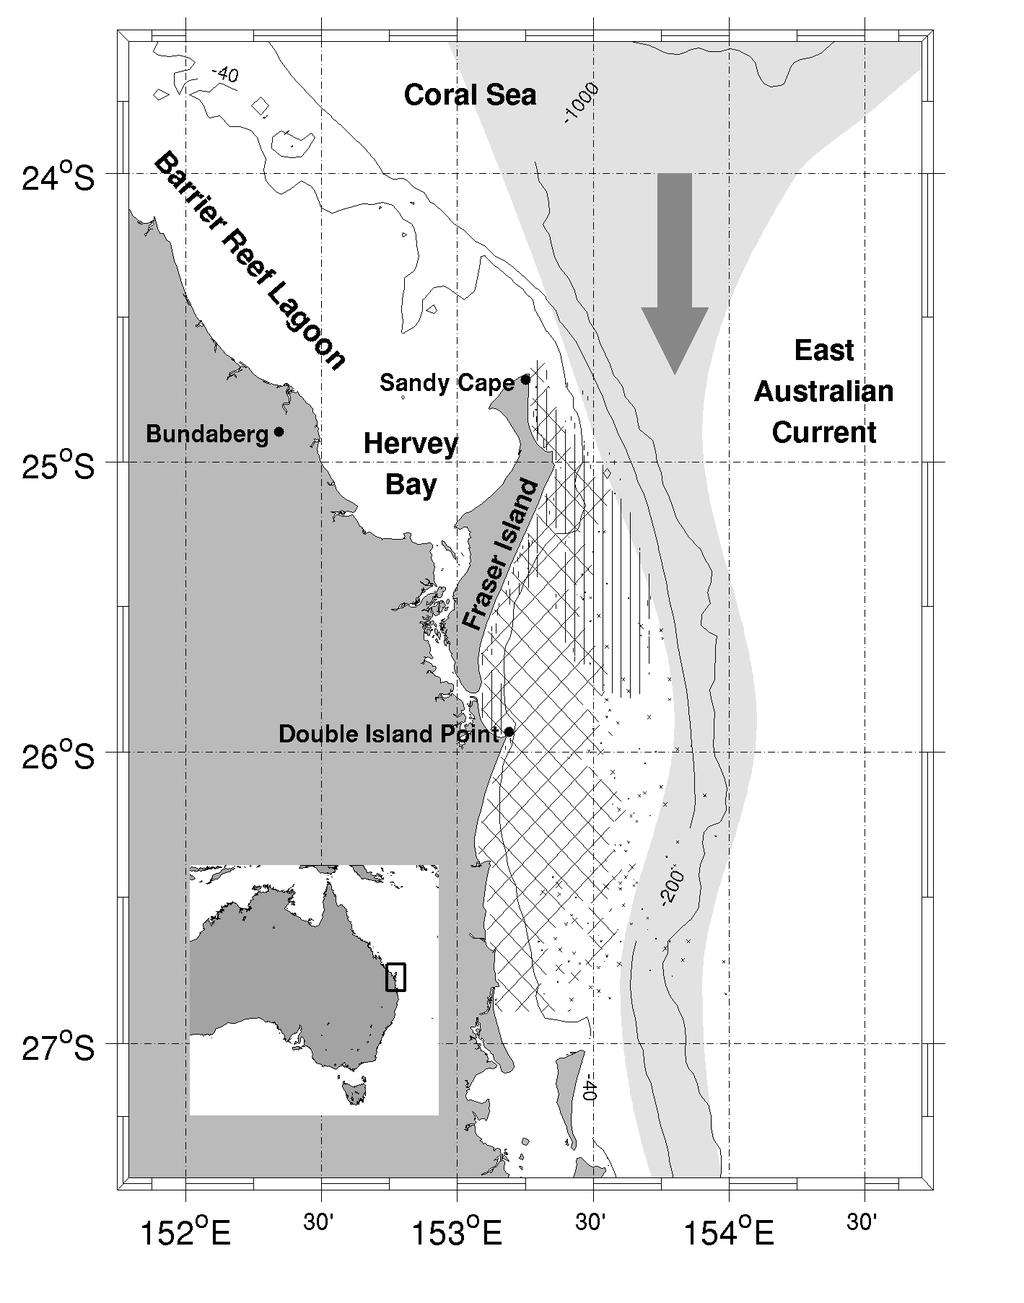 Figure 1: Map of the region of interest along the central east coast of Australia. The most prominent feature here is the East Australian Current (EAC) moving warm northern Coral Sea Water southward.